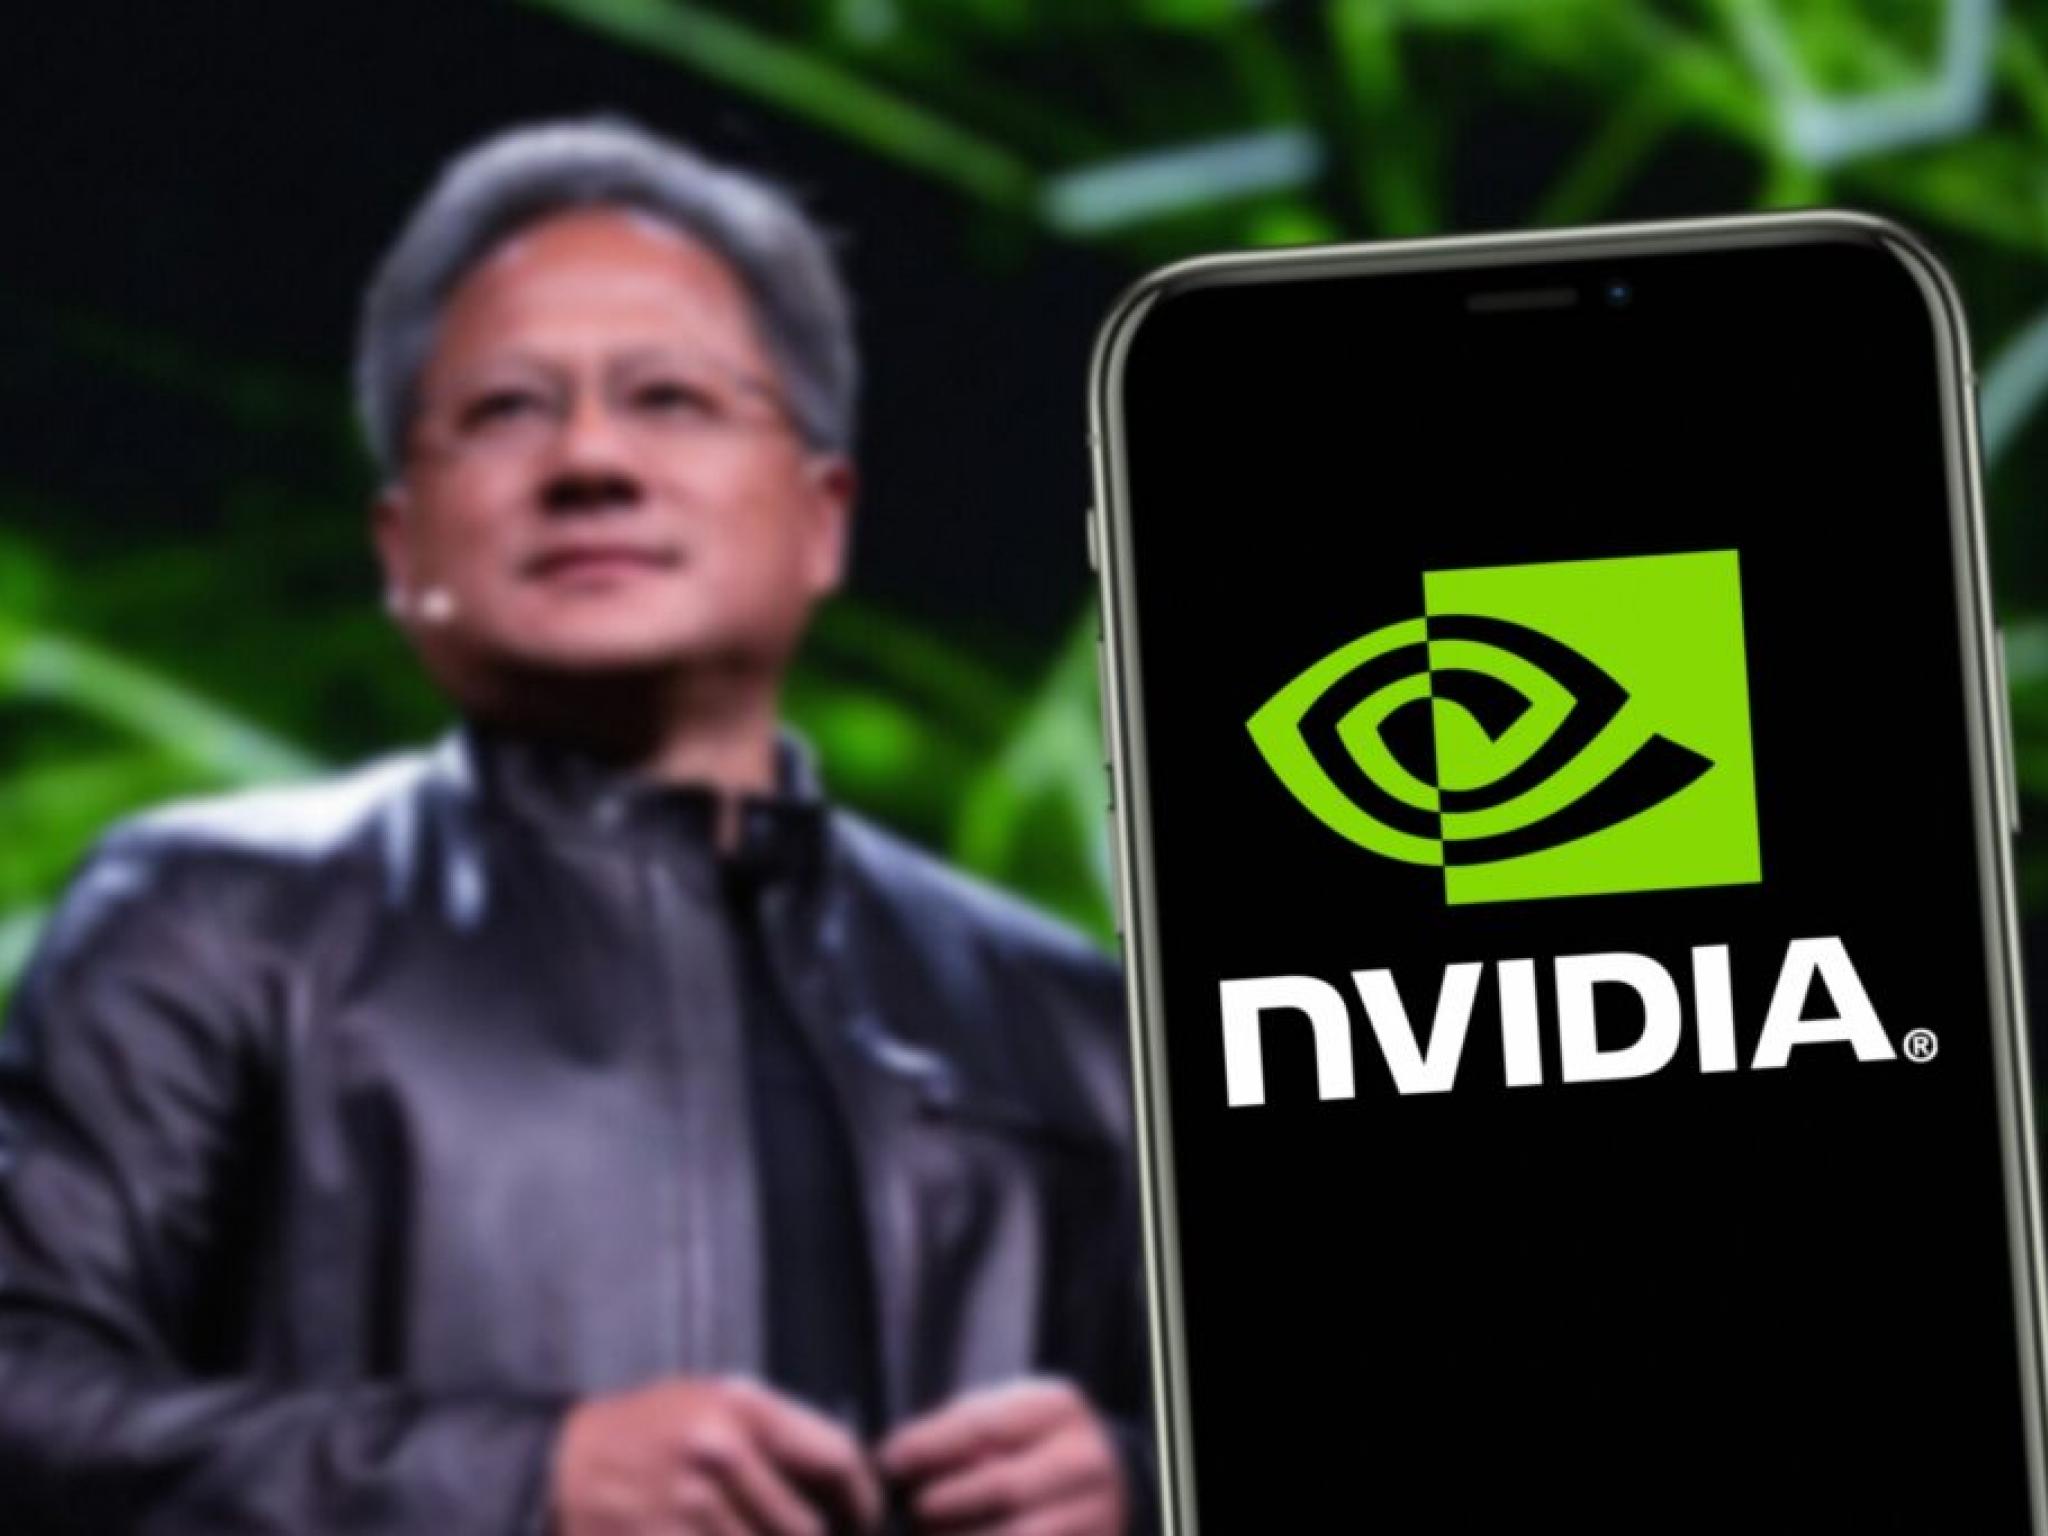  nvidia-leads-race-to-4-trillion-market-cap-analyst-praises-godfather-jensen-in-fourth-industrial-revolution 